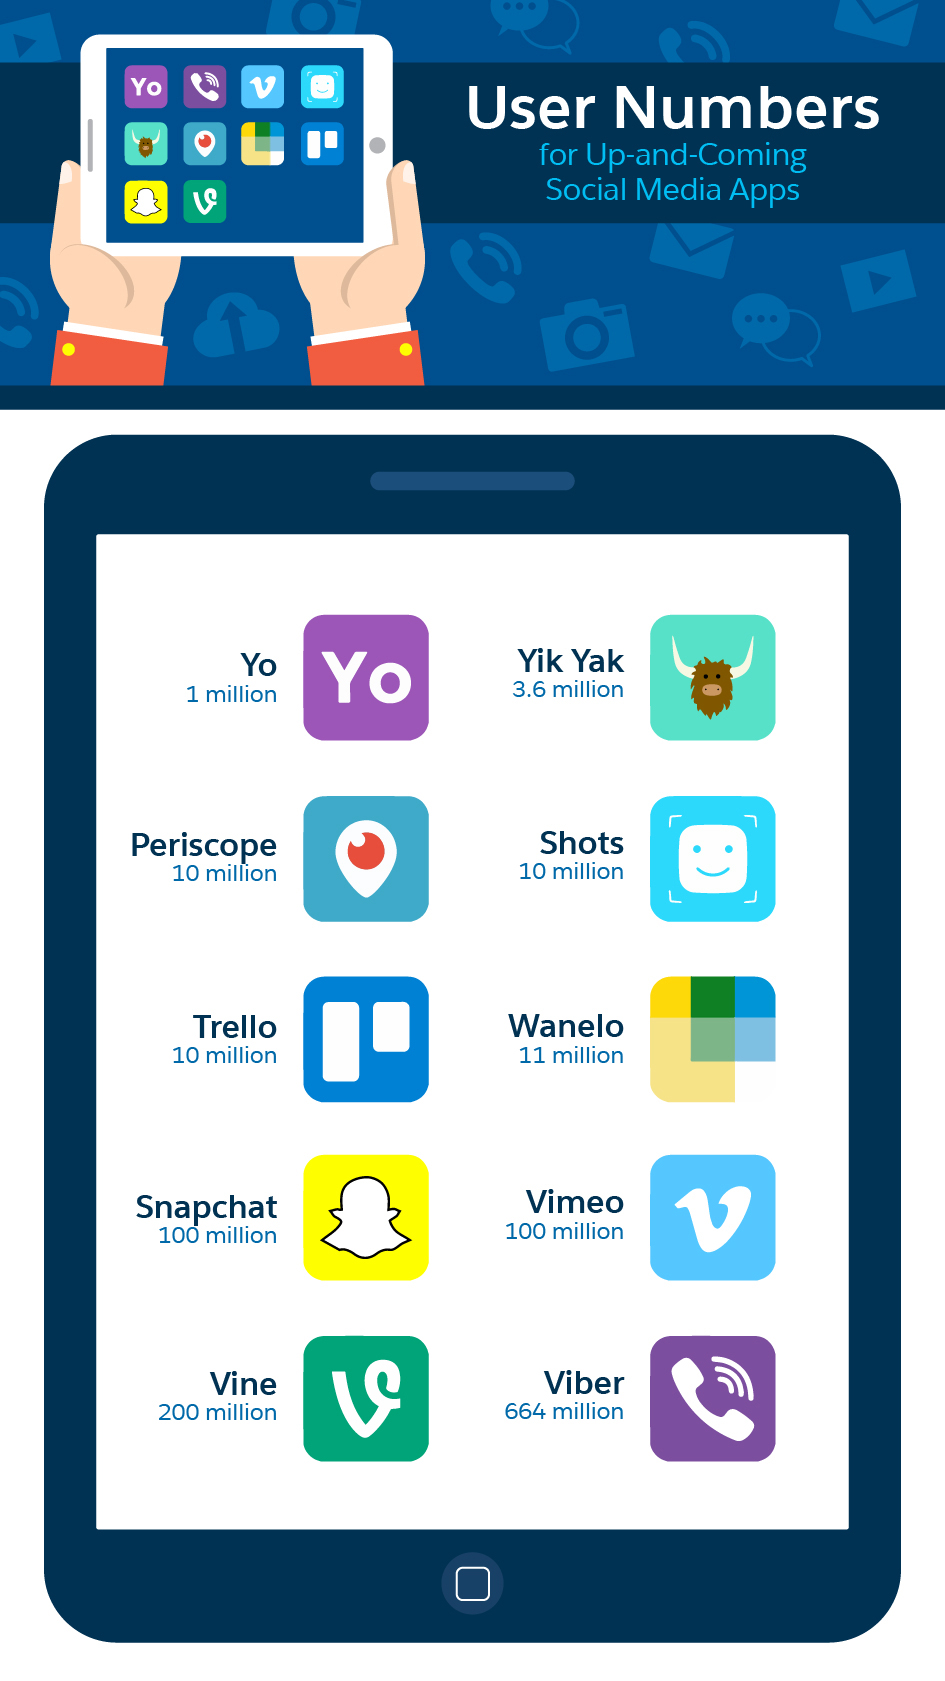 11 Smaller Social Media Apps Poised to Break Out in 2016 - Salesforce